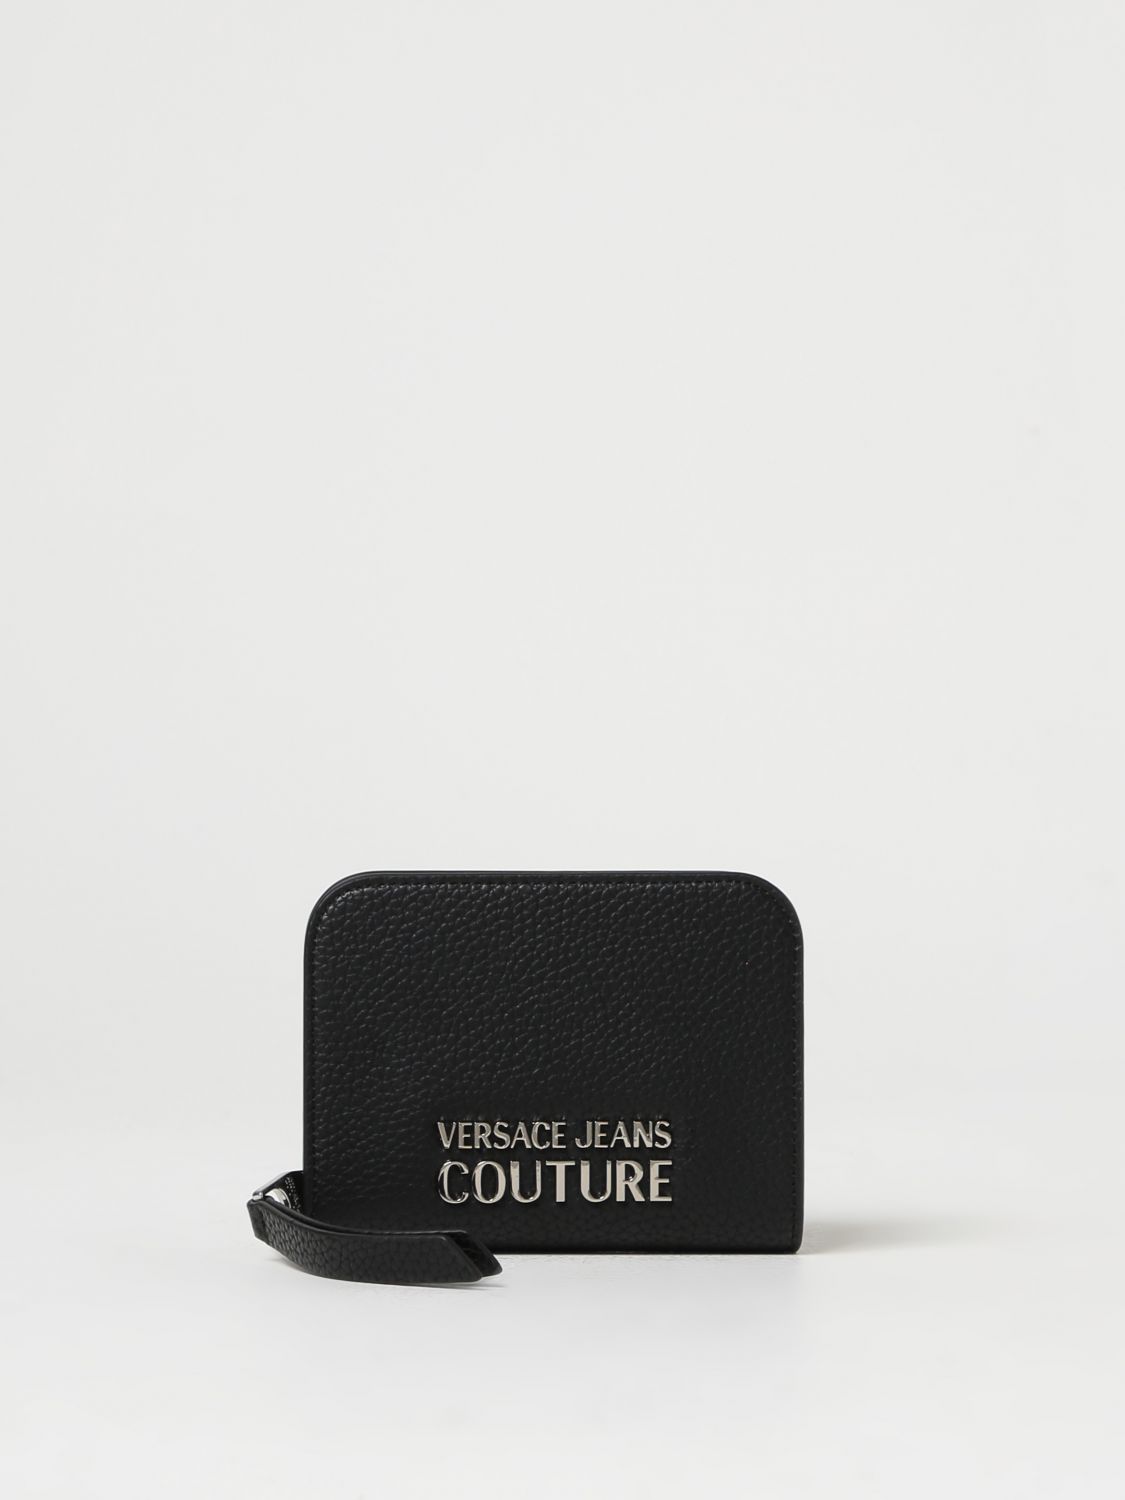 Versace Jeans Couture 钱包  女士 颜色 黑色 In Black